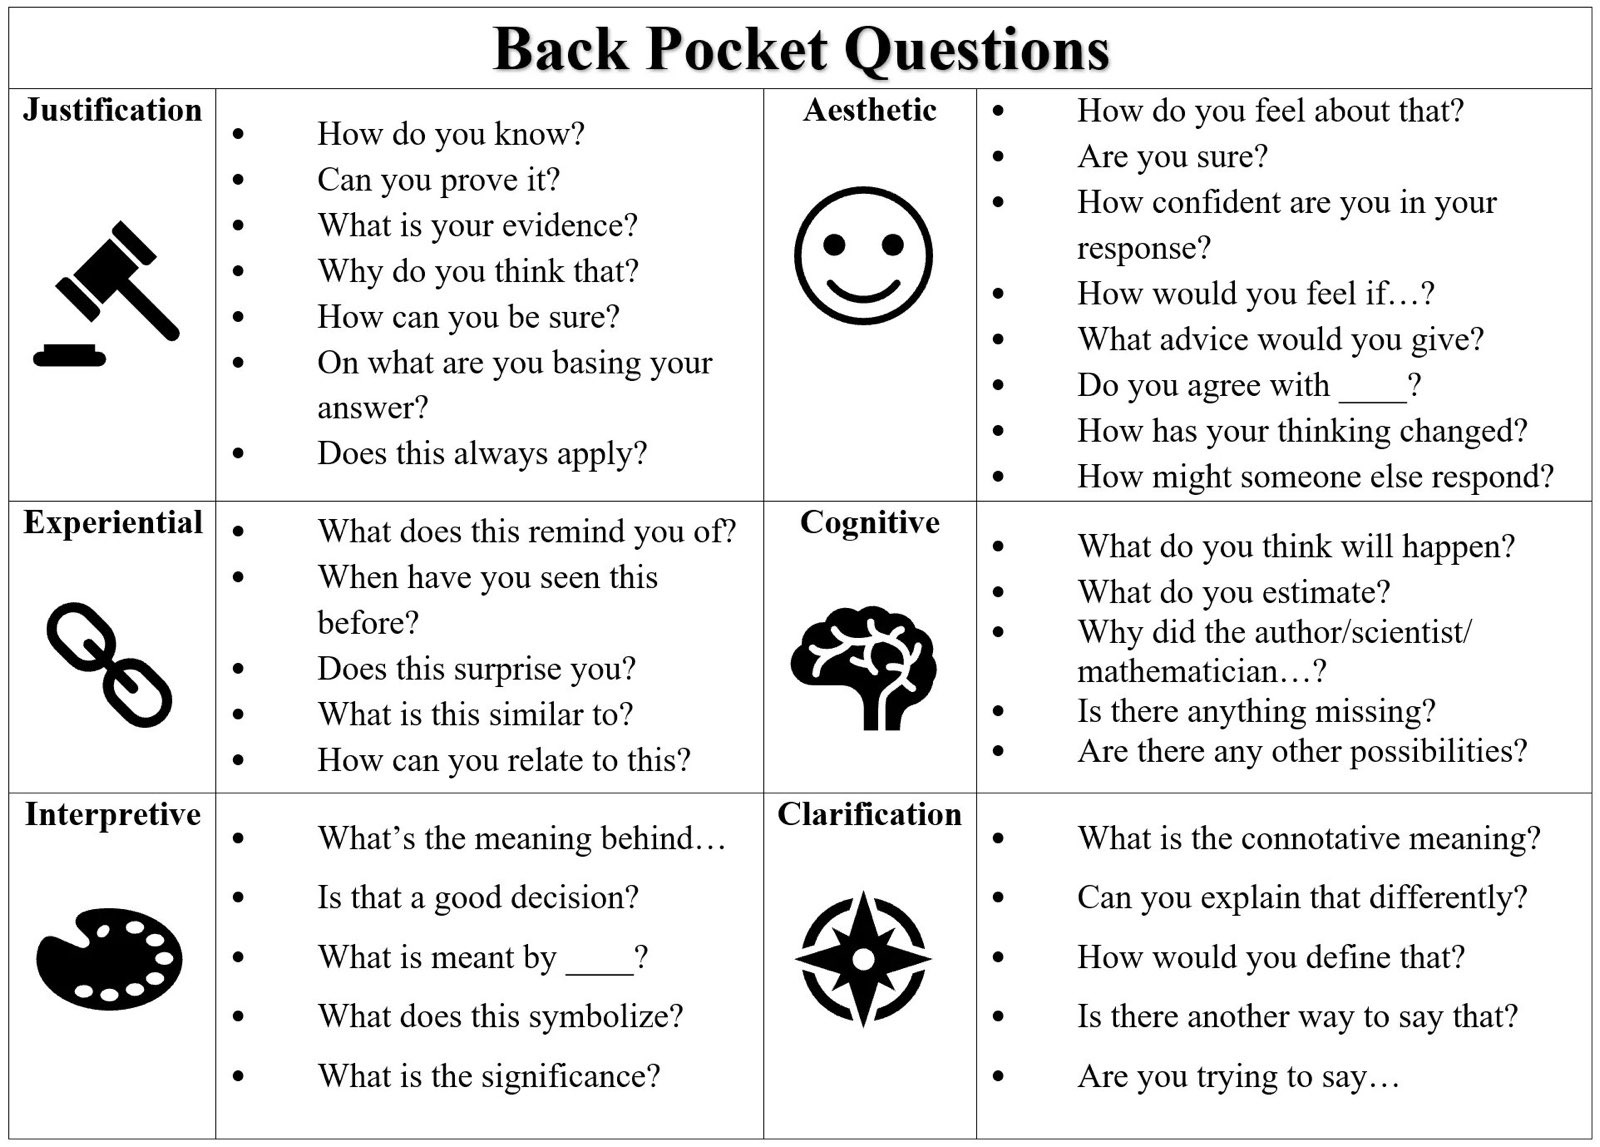 back pocket questions for science denial and to encourage scientific thinking